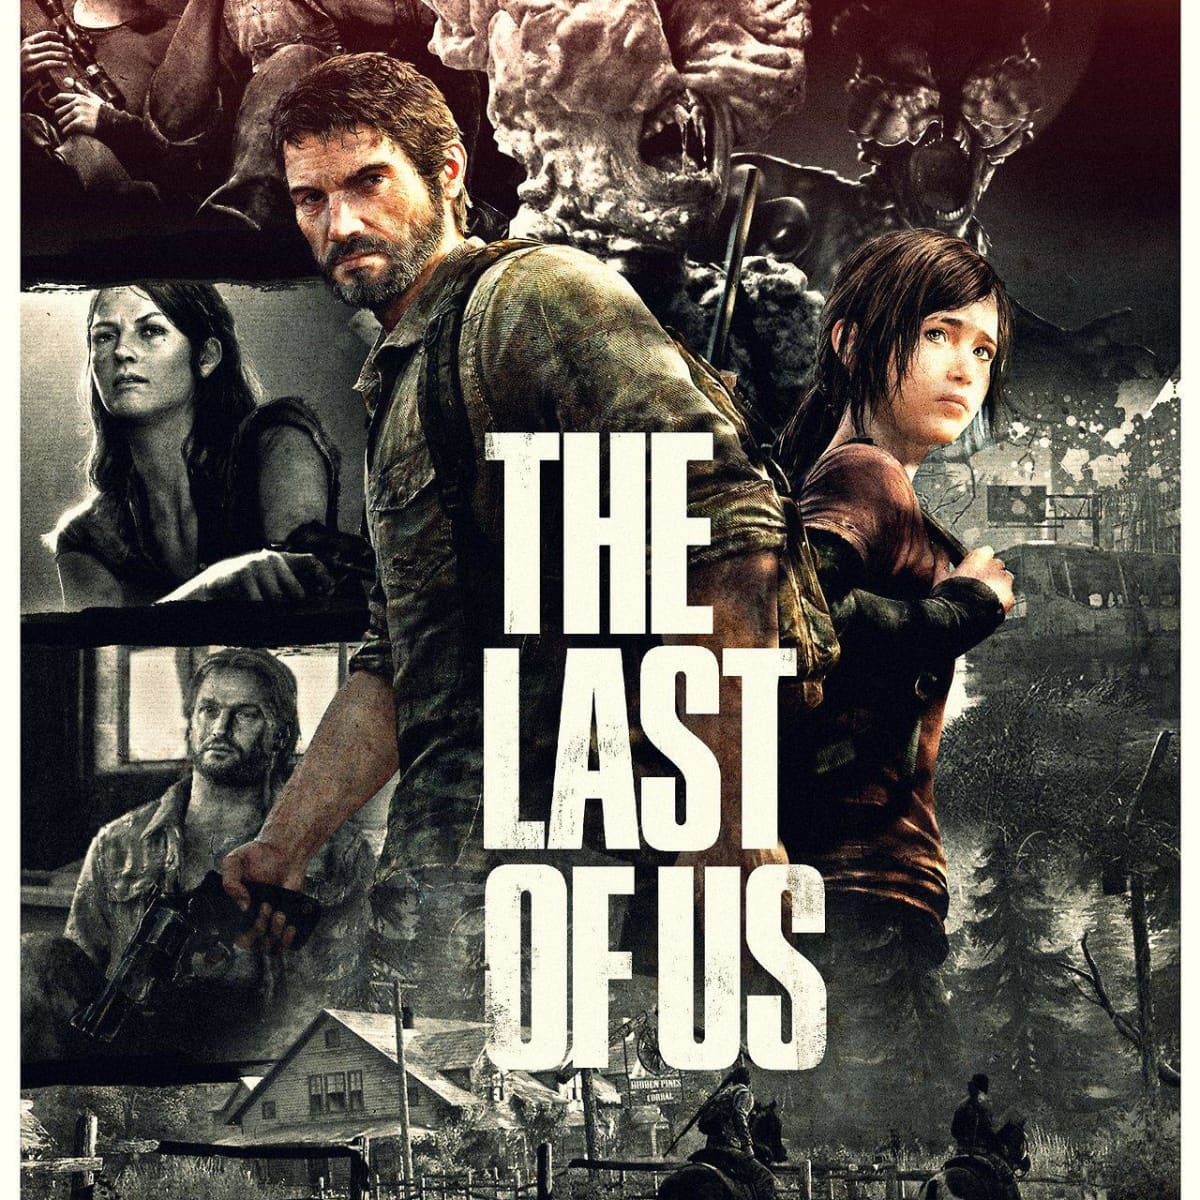 19 Games Like The Last of Us You Definitely Need to Play